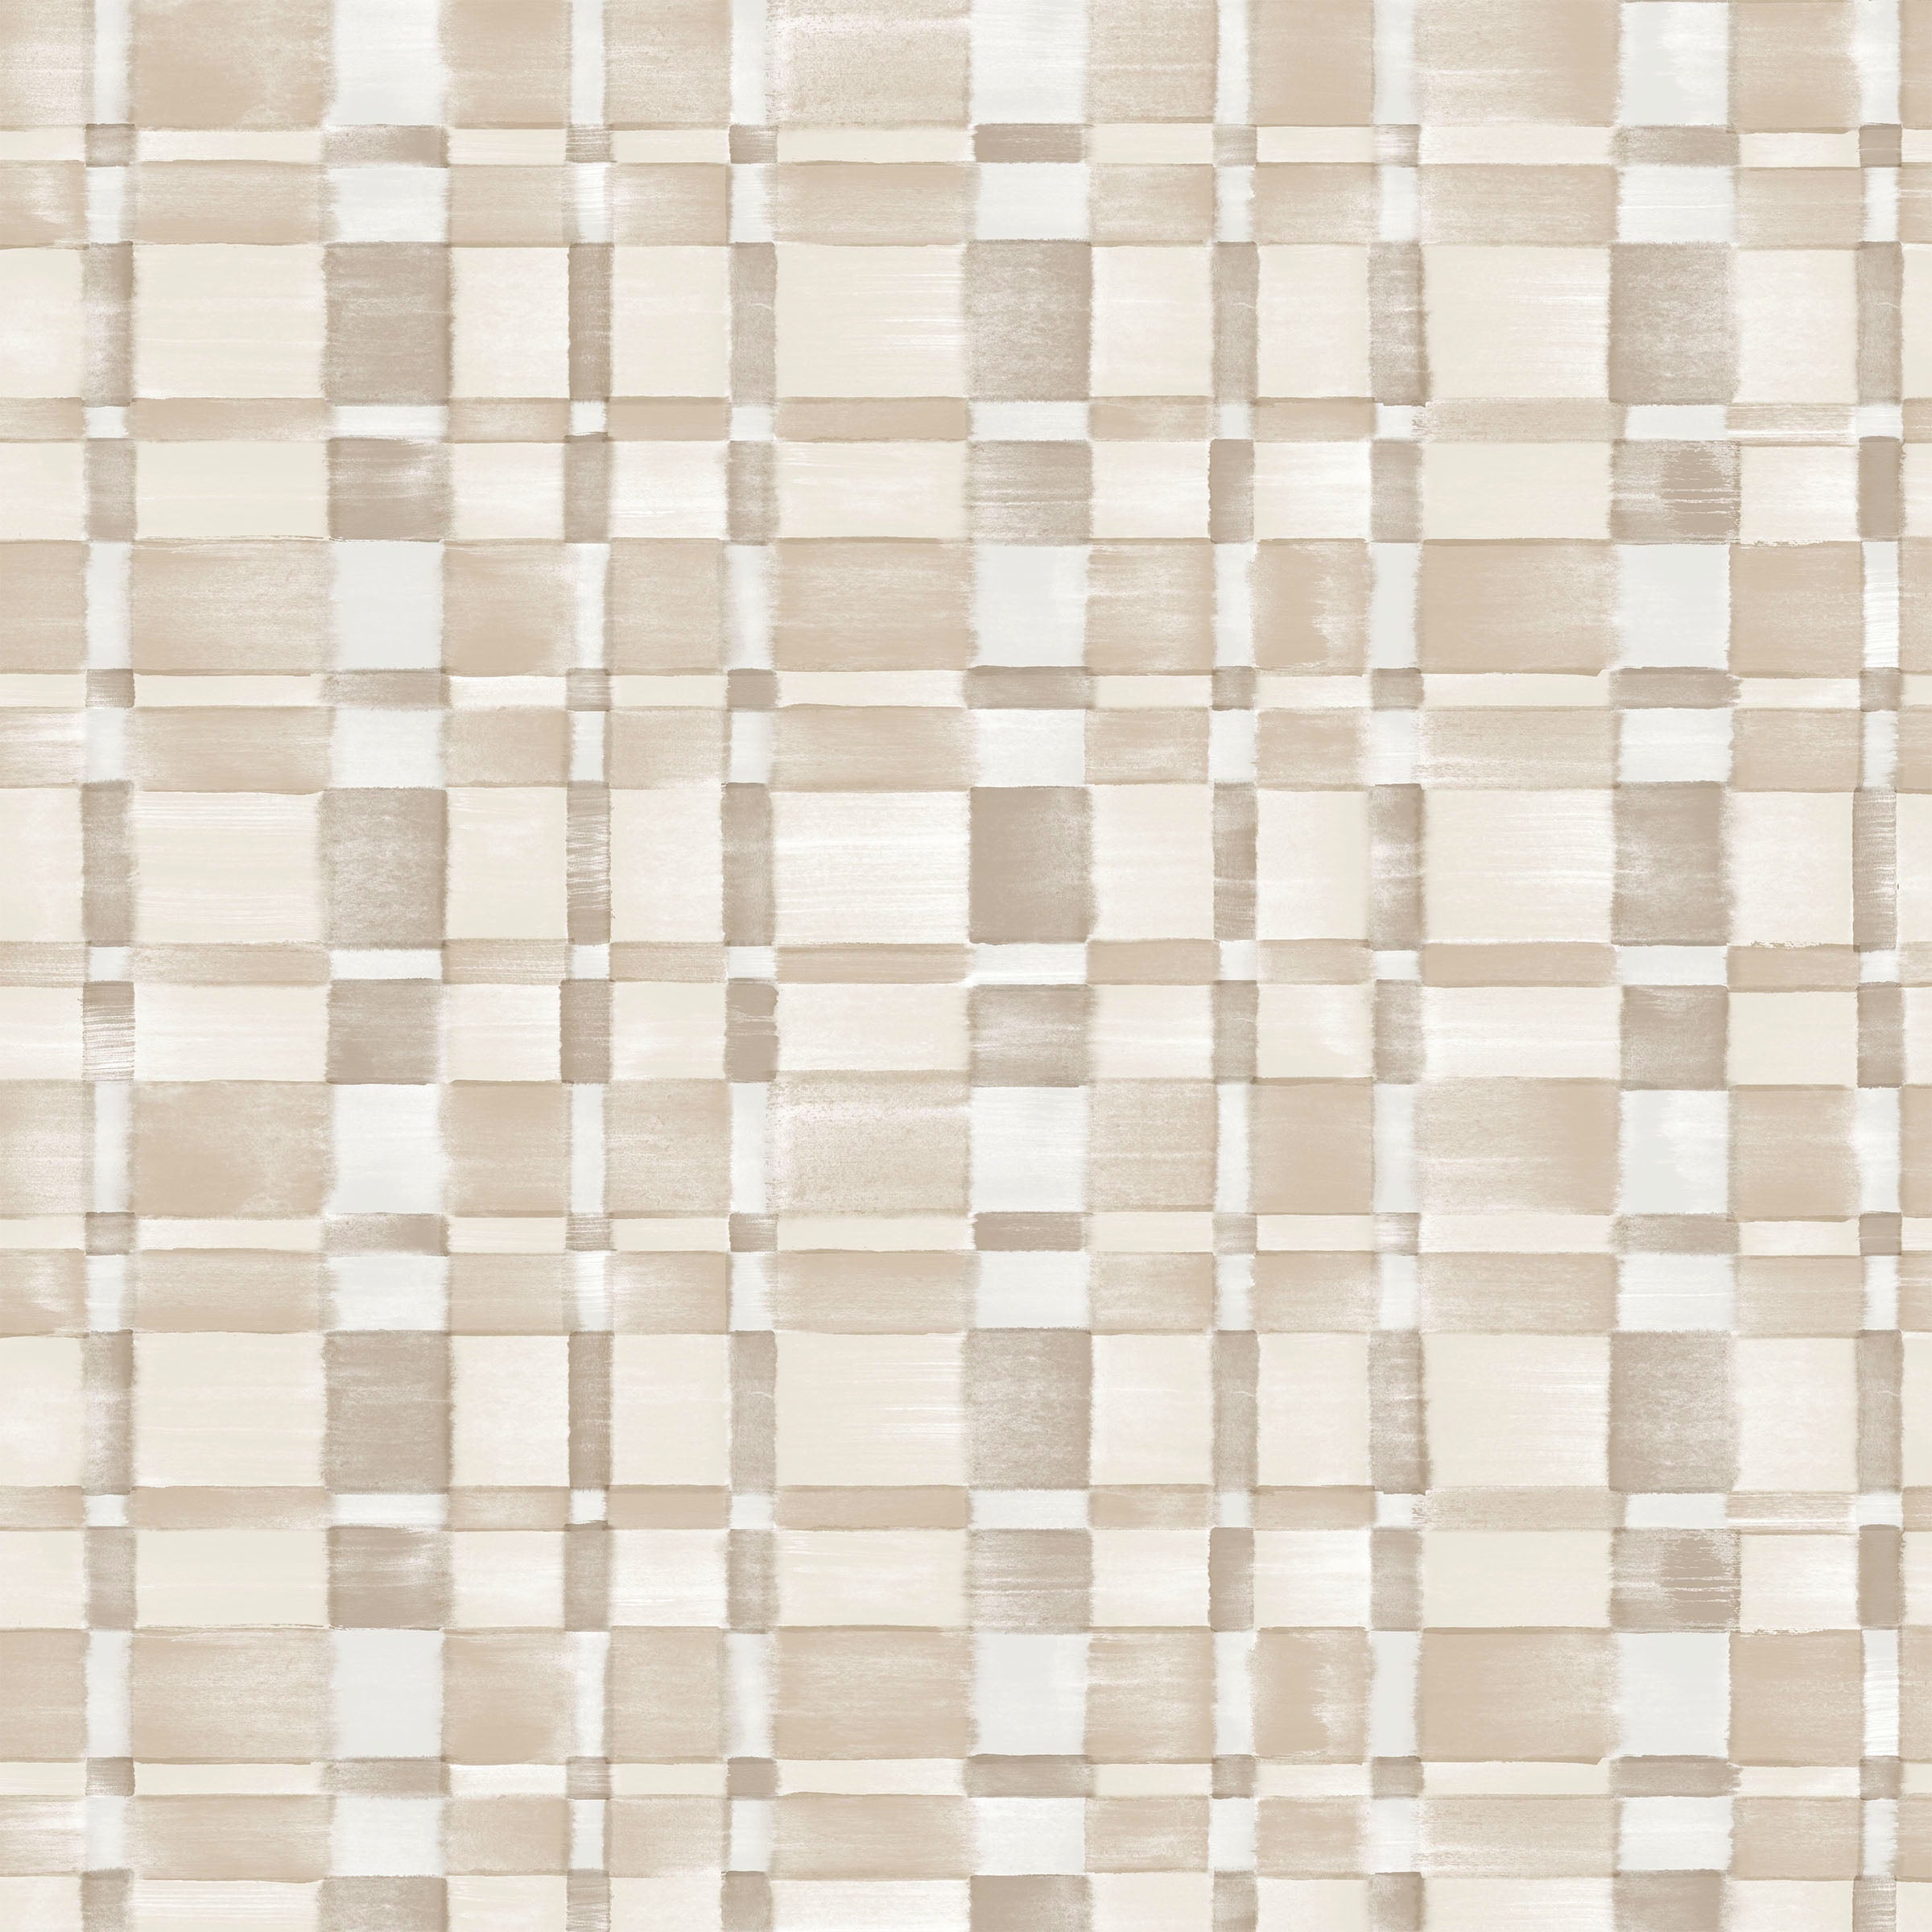 Detail of fabric in a large-scale checked pattern in shades of cream and tan.